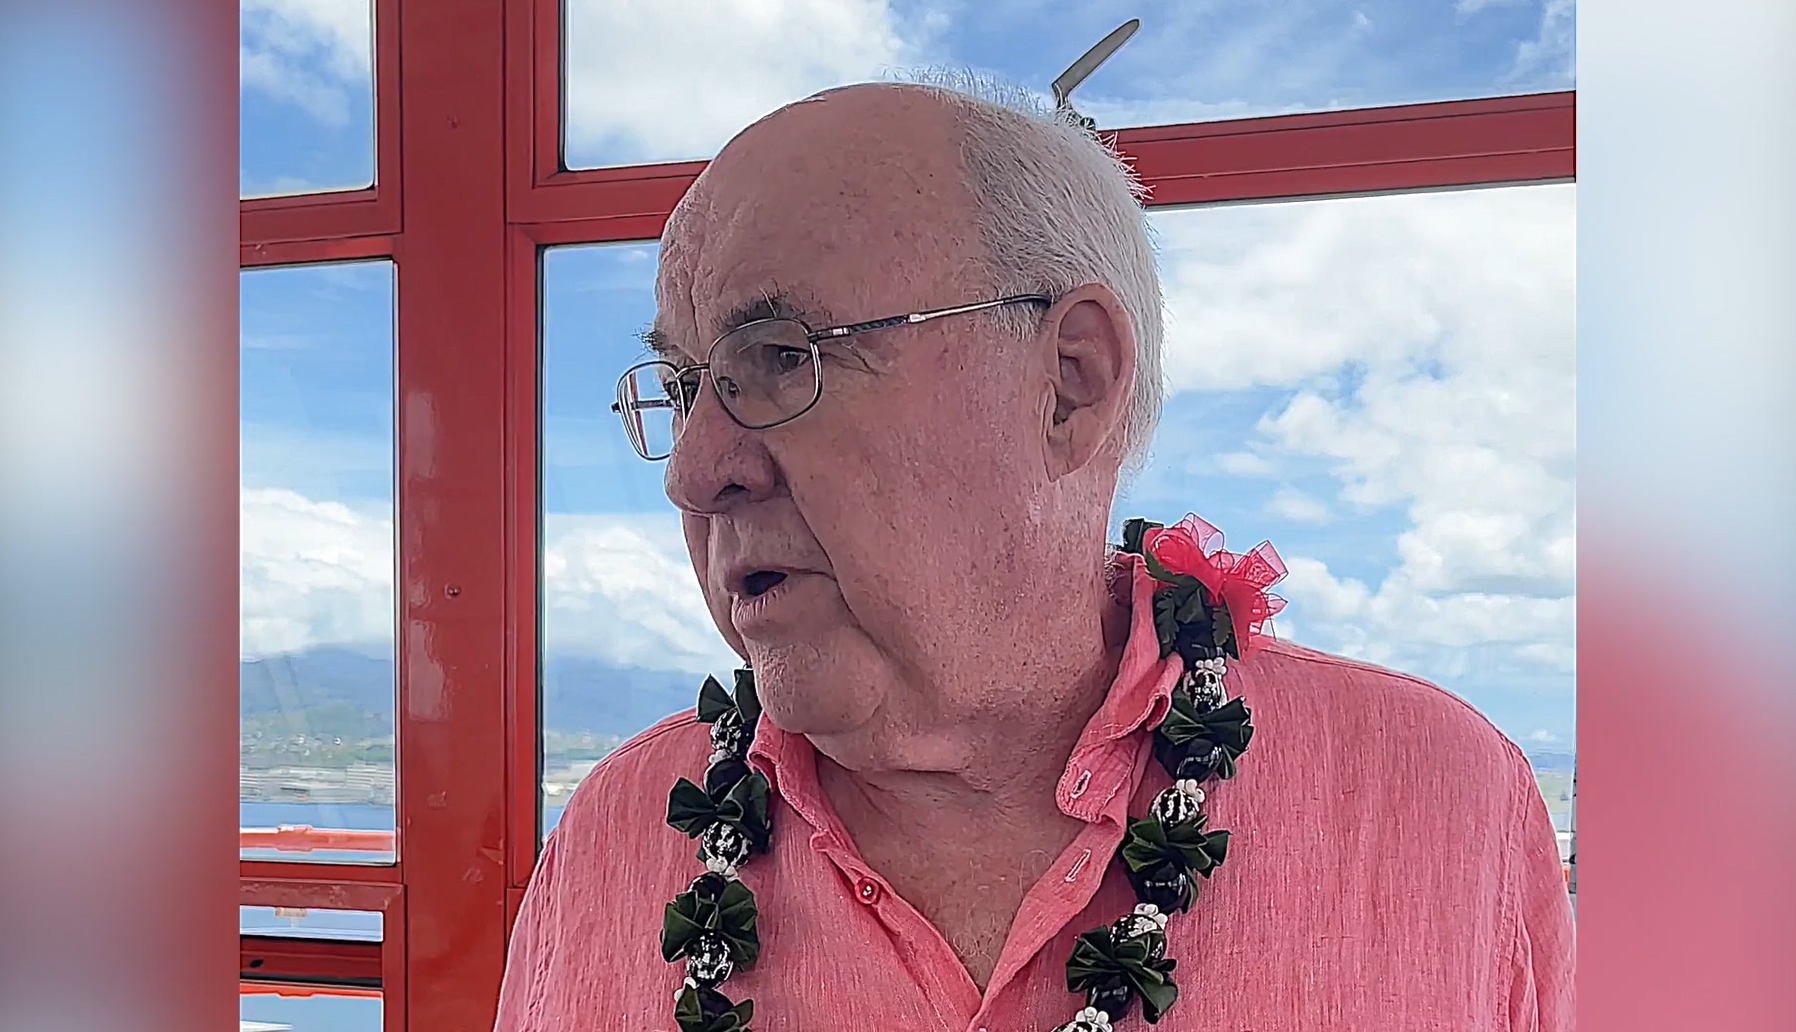 The dedication of the Ford Island Control Tower’s opening was held over Memorial Day weekend, and U-Haul CEO Joe Shoen was there to experience Freedom’s View atop the tower.